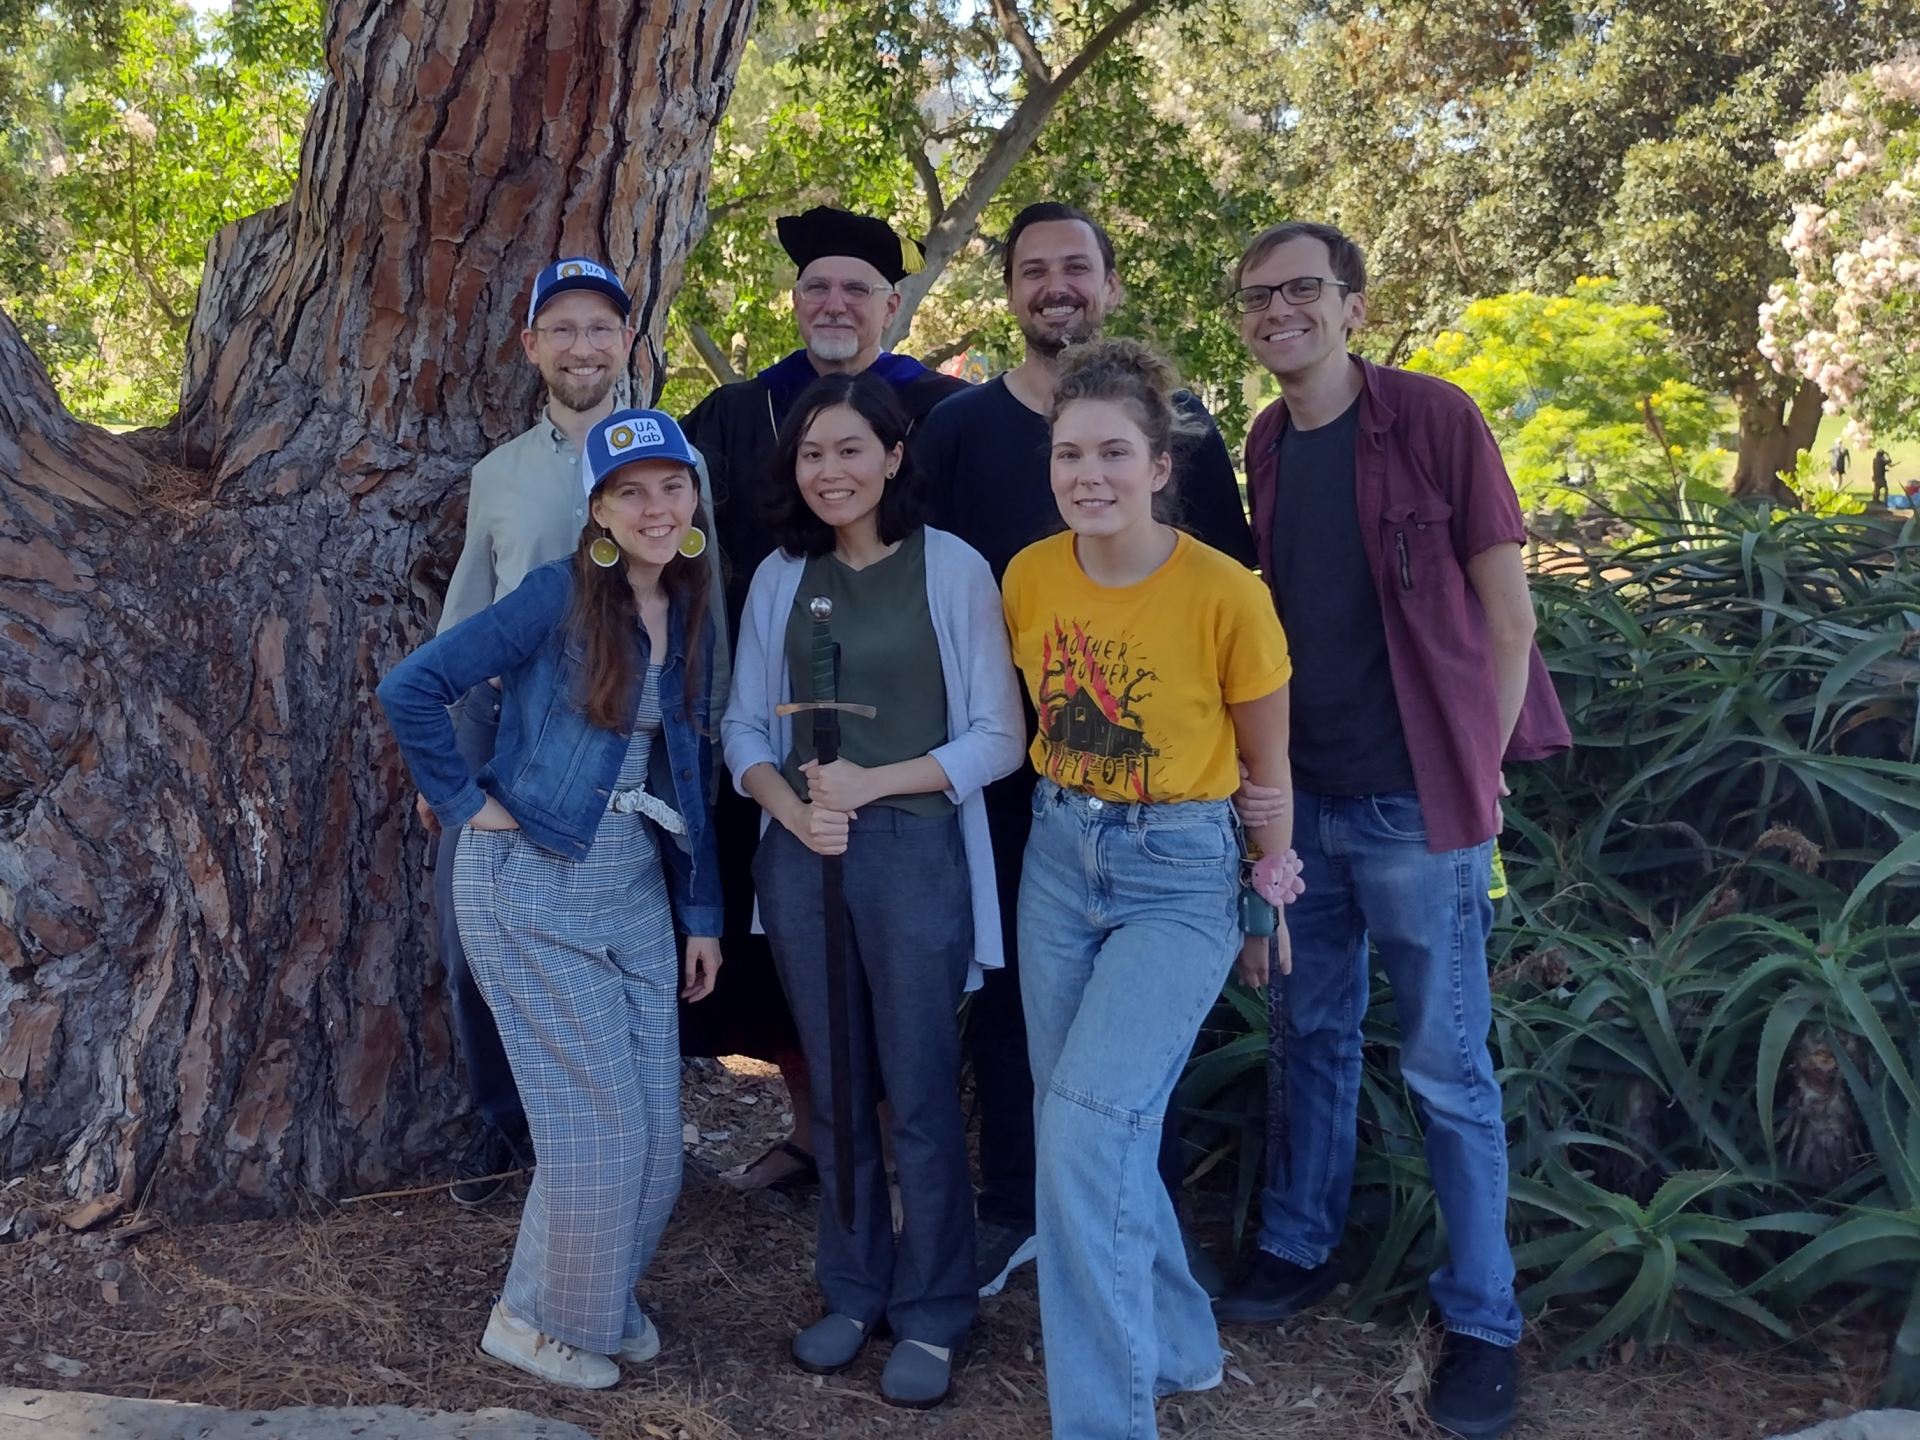 In July 2023, The Smith Ultrafine Aerosol Group paused for a portrait on the Irvine campus. From left, at rear, are postdoc Paulus Bauer, Smith, graduate student Jeremy Wakeen, and graduate student Adam Thomas. From left to right, in front, are graduate student Anna Kapp, freshly minted PhD Michelia Dam, and graduate student Kristen Cramer. The sword is engraved with the names of everyone who gets a PhD while part of the group, as Dam just did. Smith’s academic garb is part of the sword ceremony. Photo courtesy of Smith. 